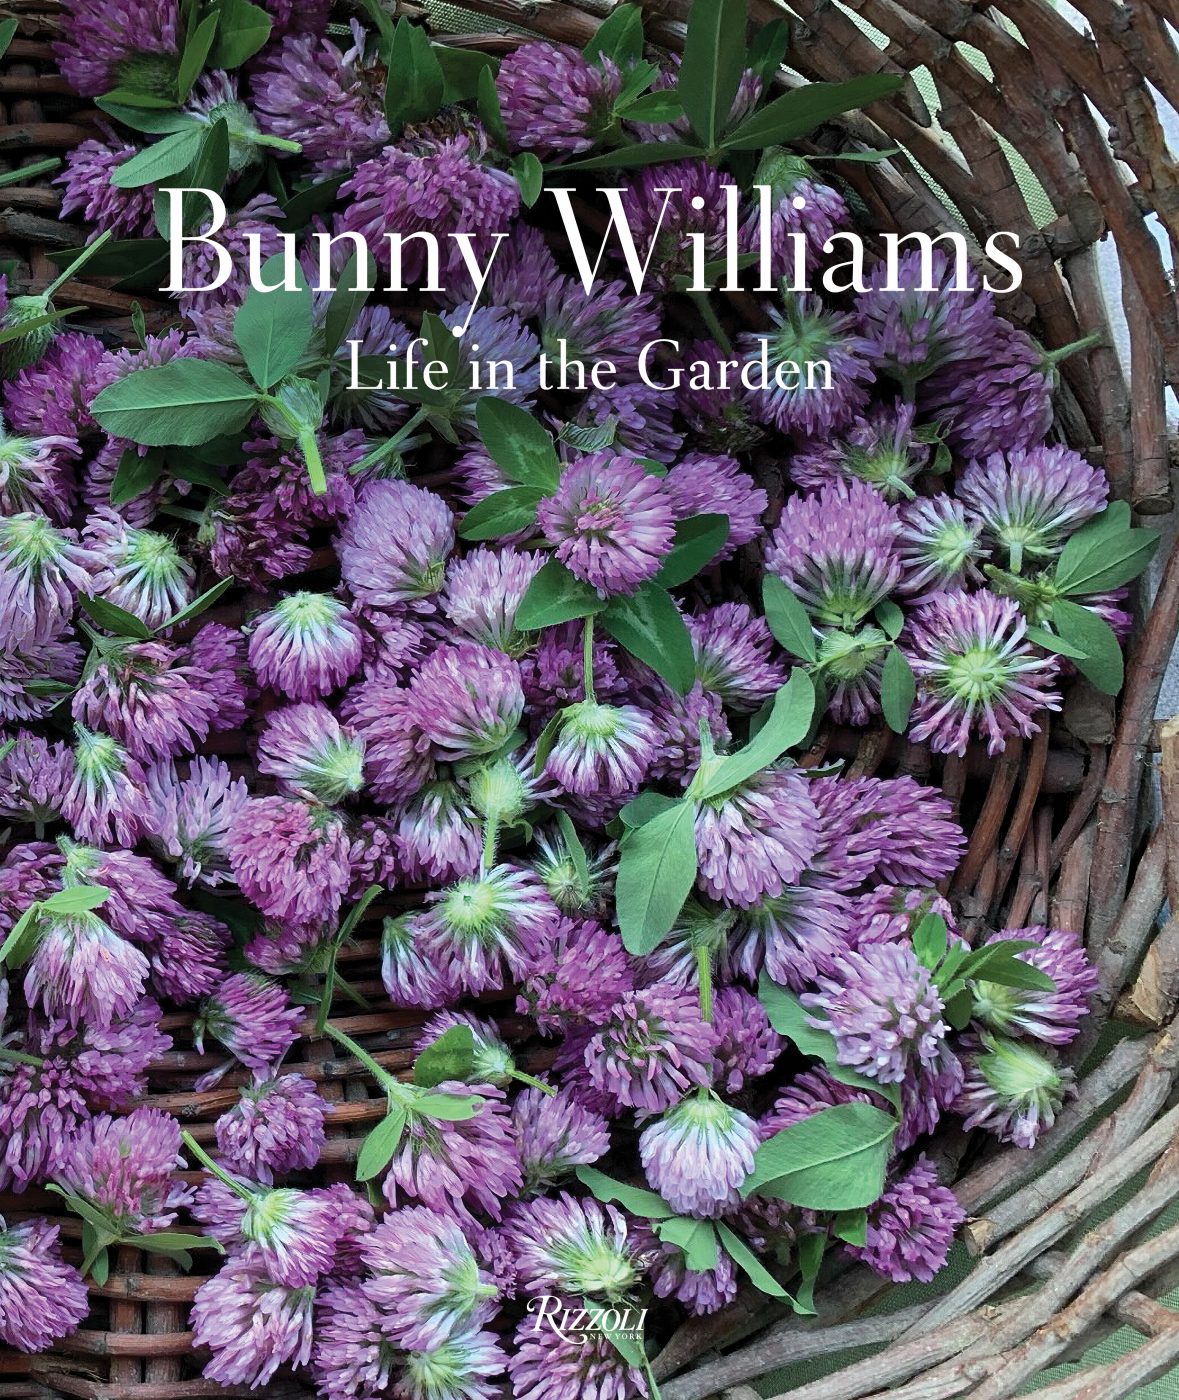 Cover of Bunny Williams's new book from Rizzoli entitled Life in the Garden